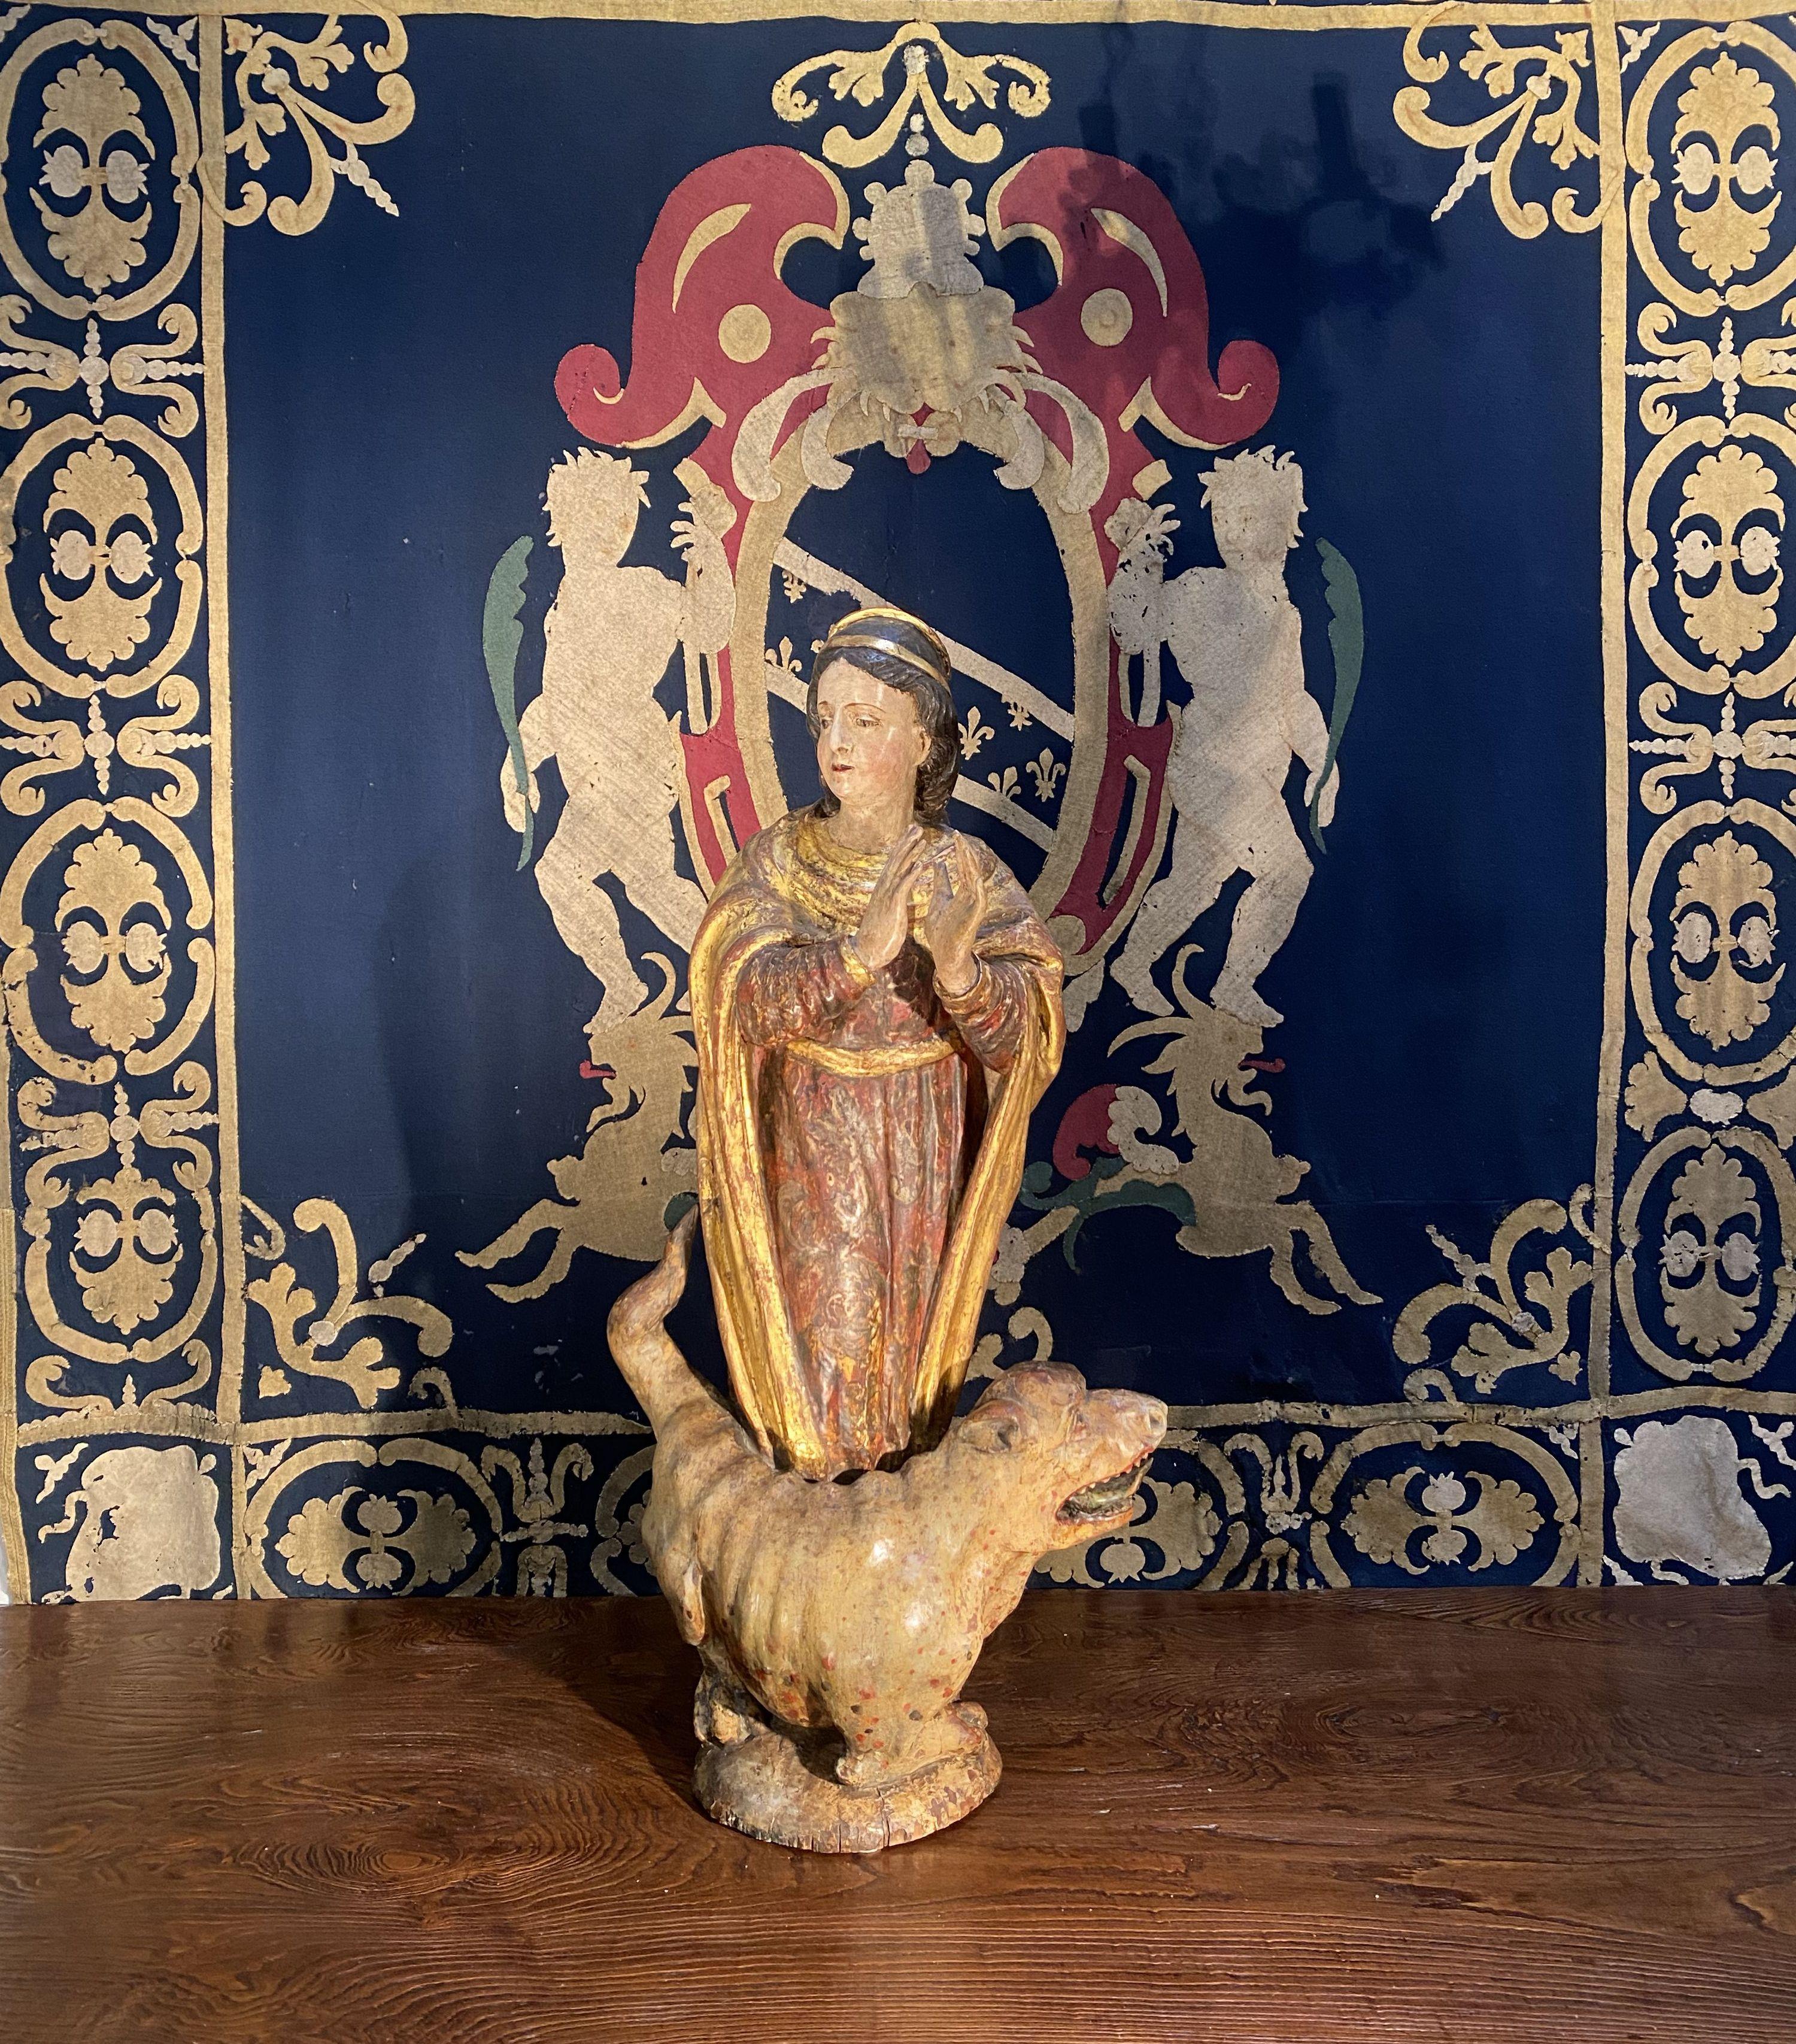 Spanish Santa Margherita with Dragon hand carved wood sculpture. 
Beautiful original polychrome especially on the dog figure which is an example of a mythical Renaissance medieval dragon. 
During the Middle Ages, St. Margherita was grouped with 13